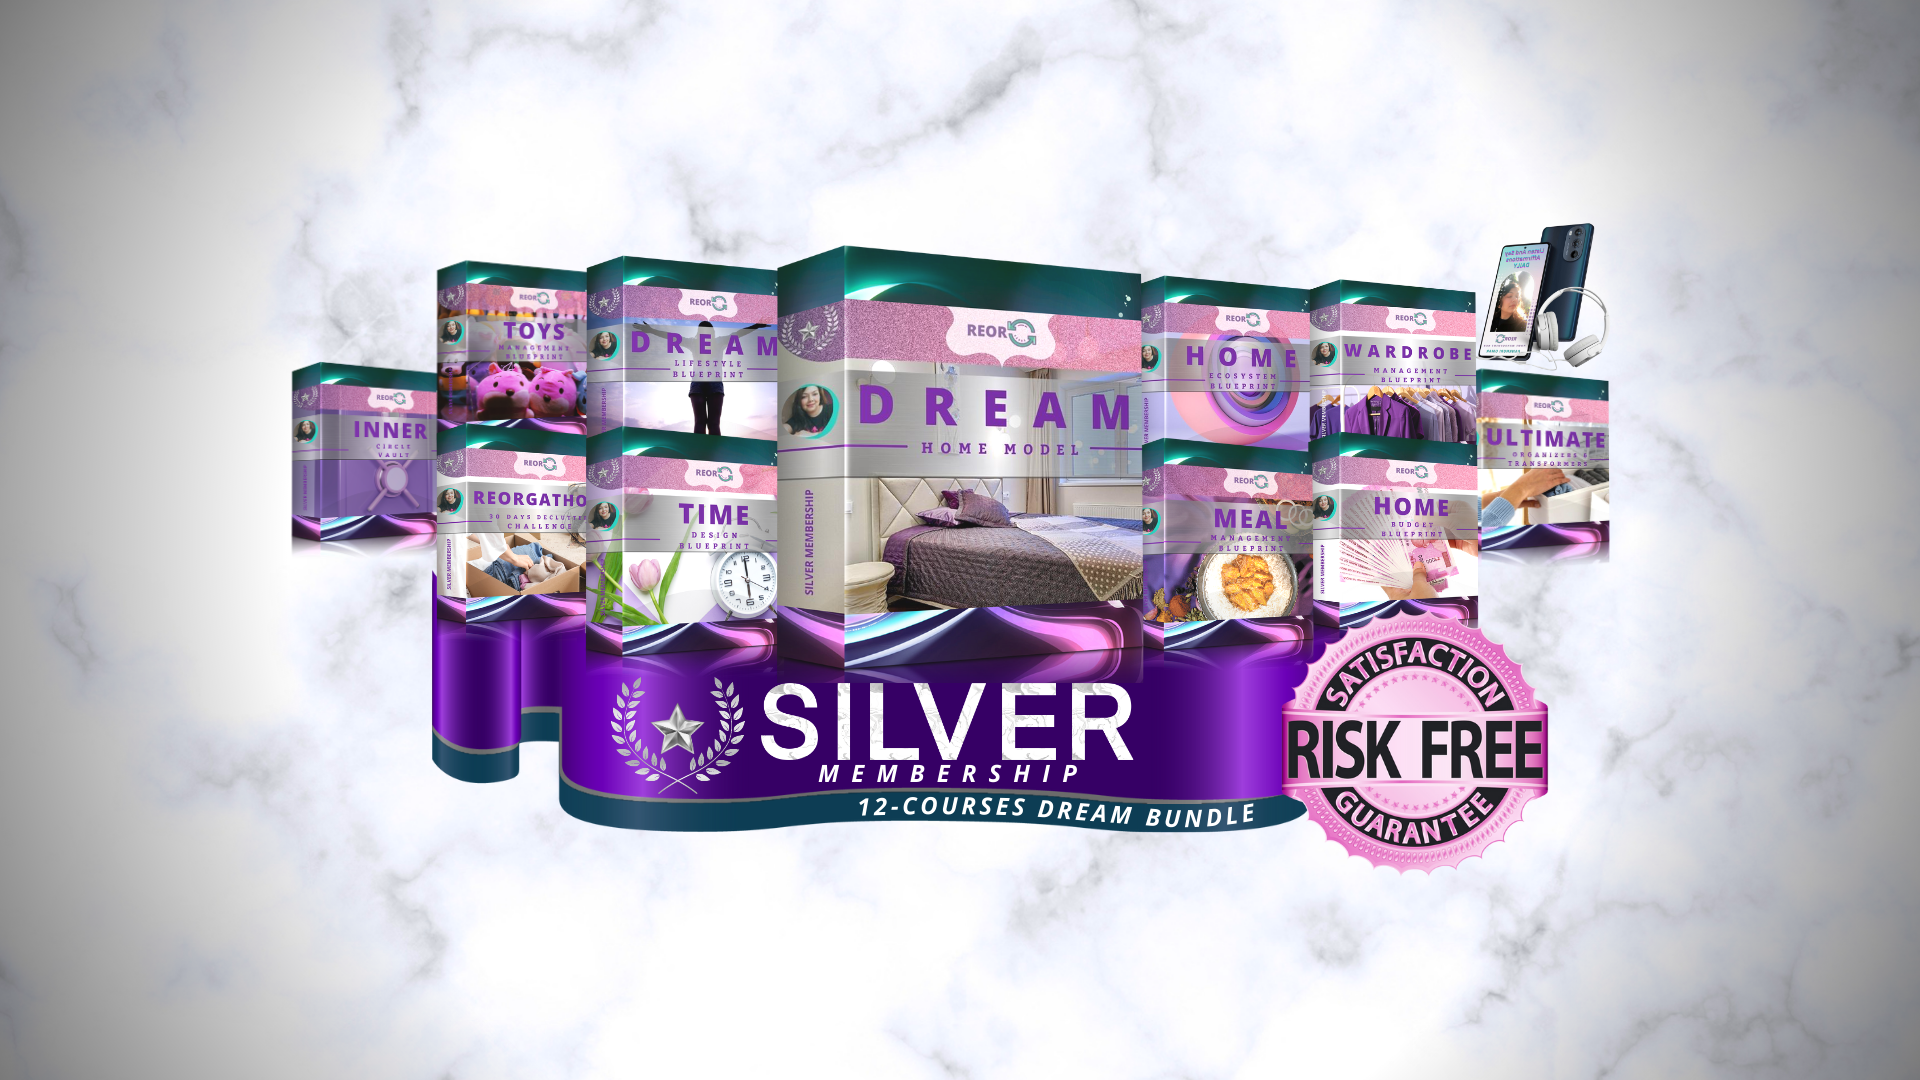 Reorganize With Pankhuri Silver Membership Dream Home Model Decluttering And Reorganizing 12 Courses Bundle